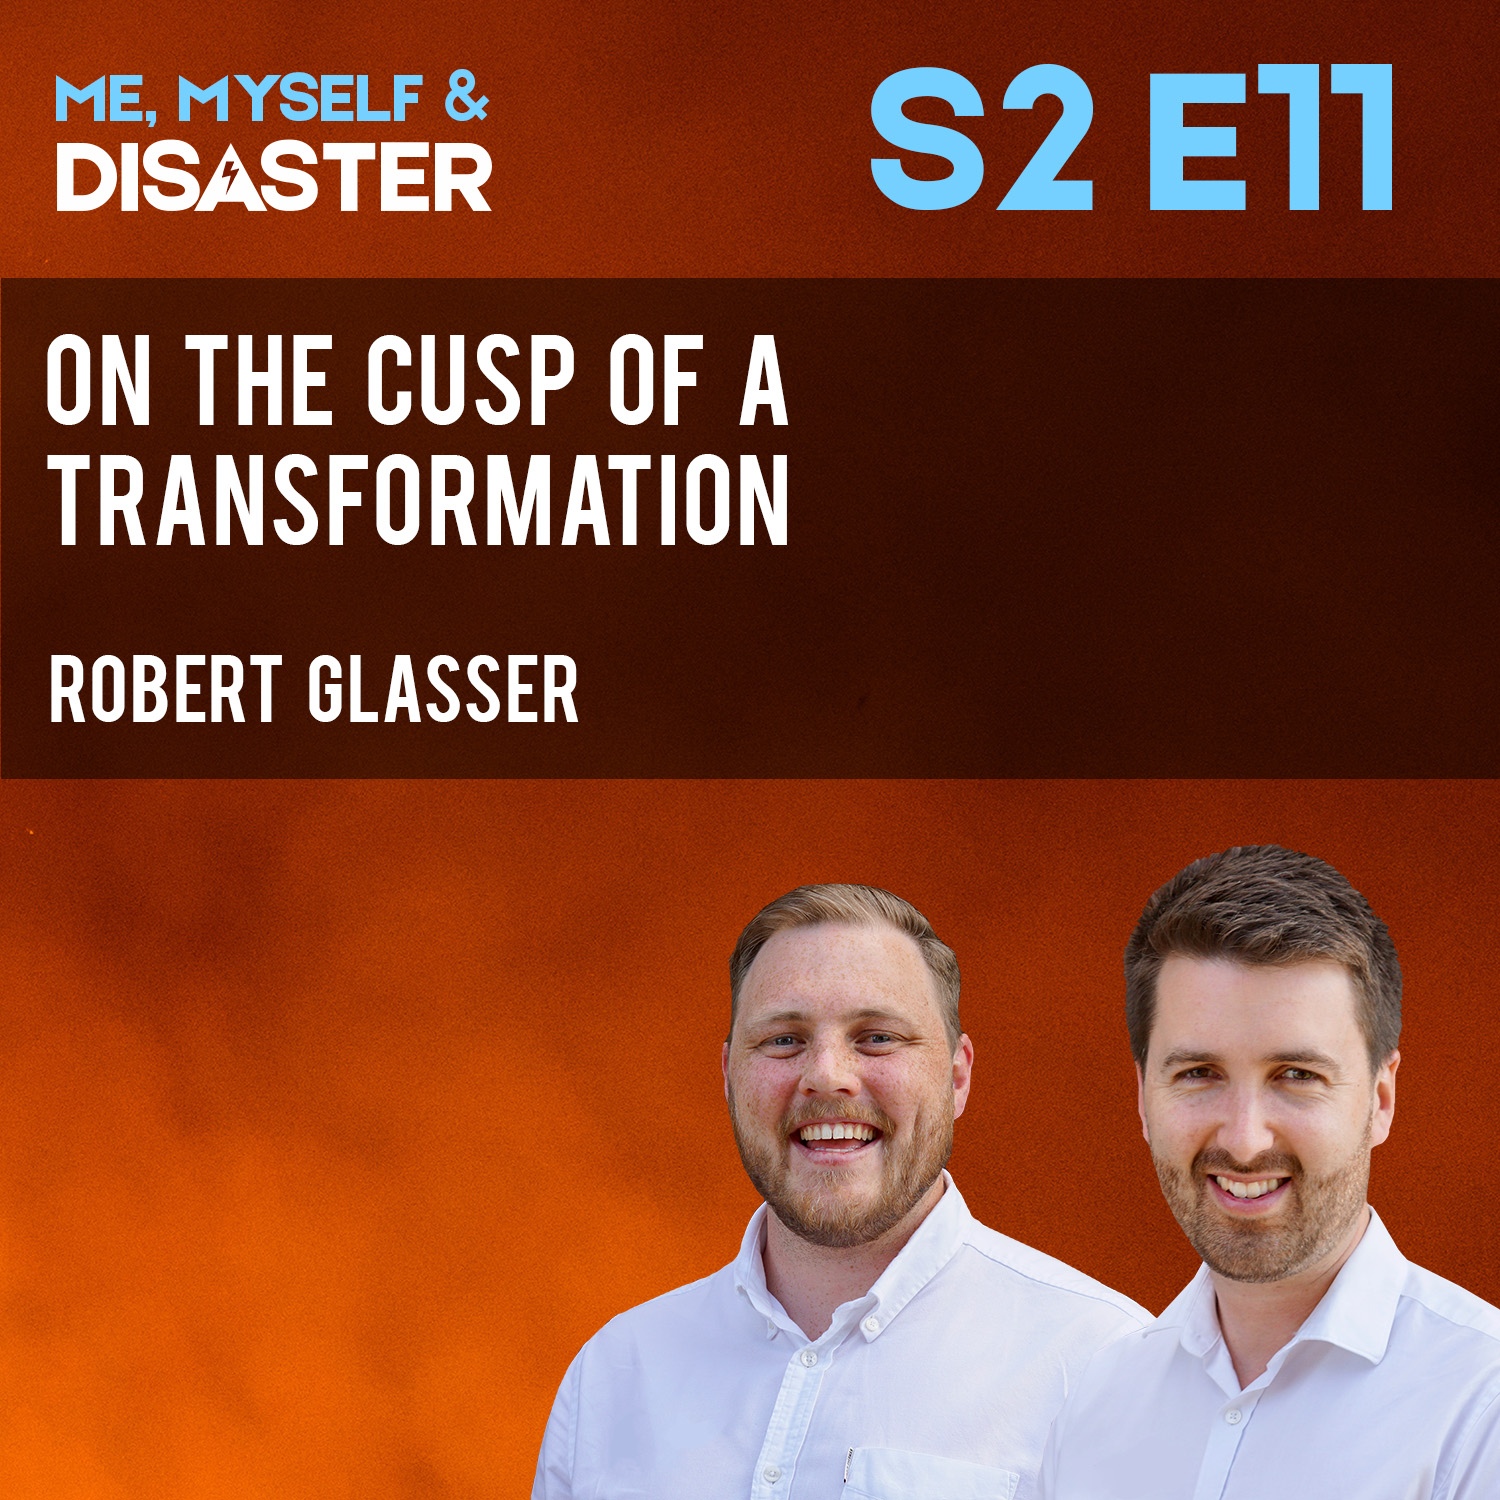 Dr Robert Glasser: On the Cusp of a Transformation